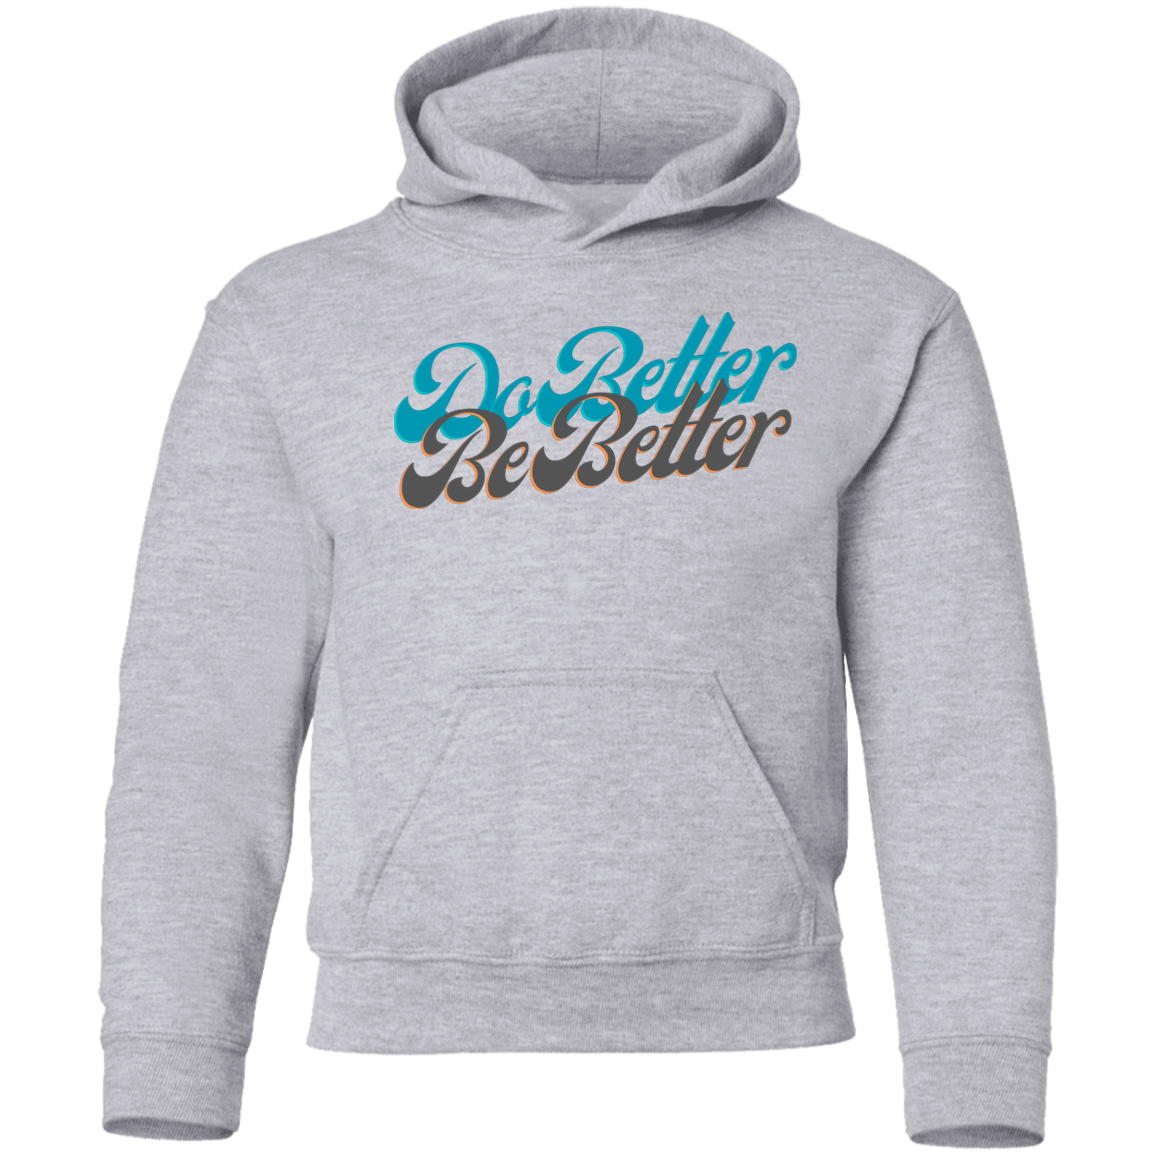 DB3 Youth Pullover Hoodie